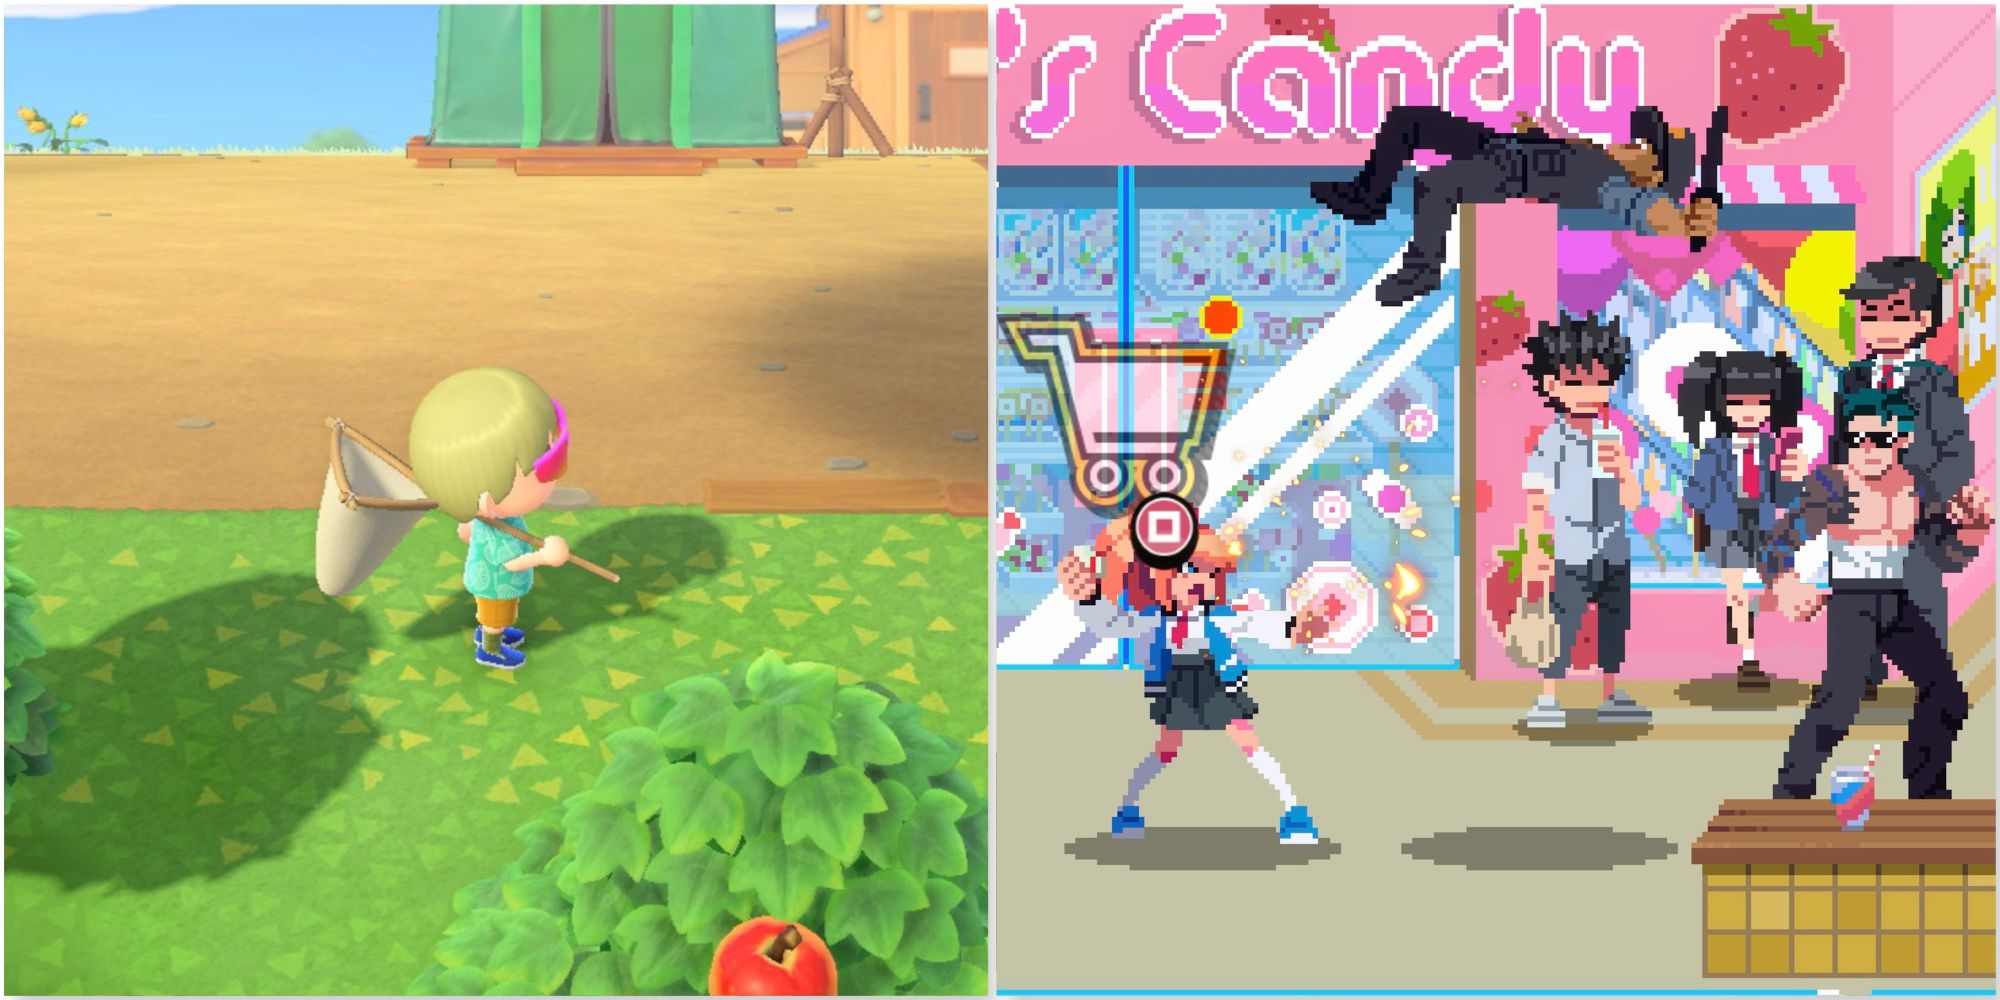 Exploring the world in Animal Crossing New Horizons and Fighting enemies in River City Girls 2